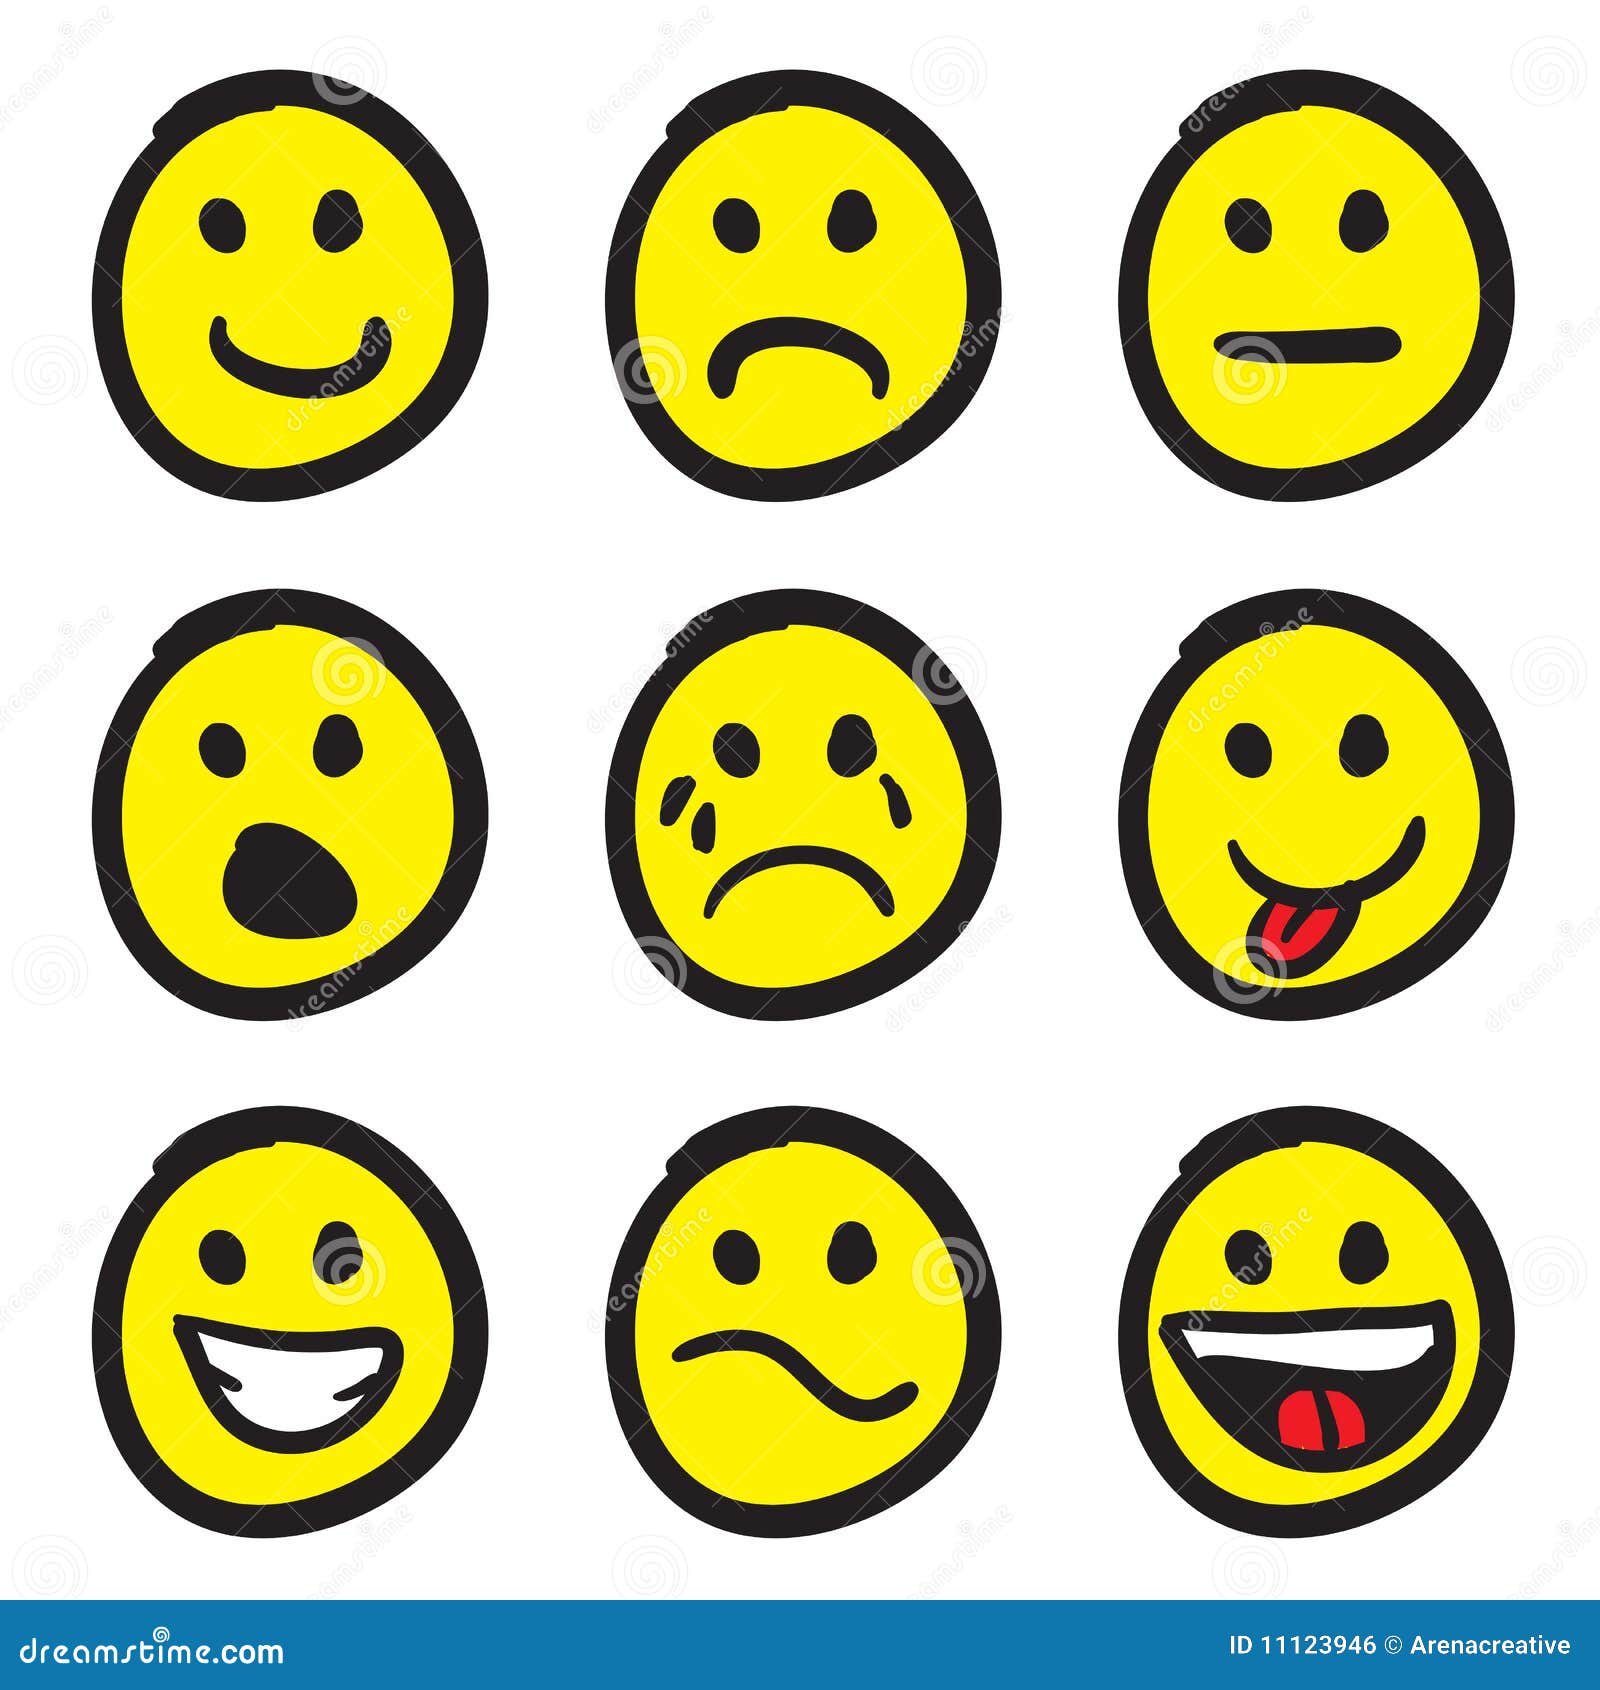 Cartoon Smiley Faces stock vector. Illustration of laugh - 11123946